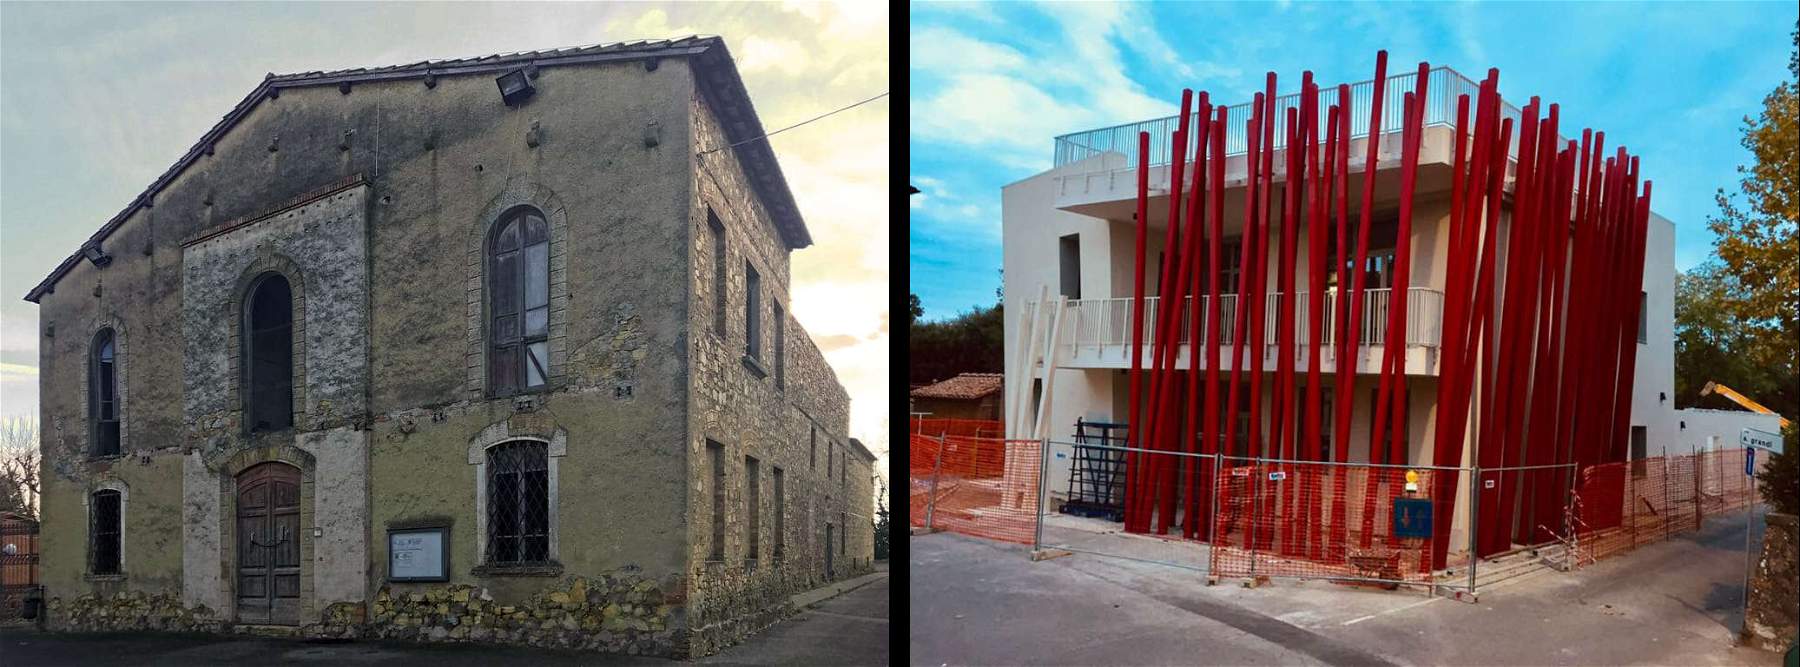 Controversy in Gambassi Terme over the new functional center that replaced the old theater